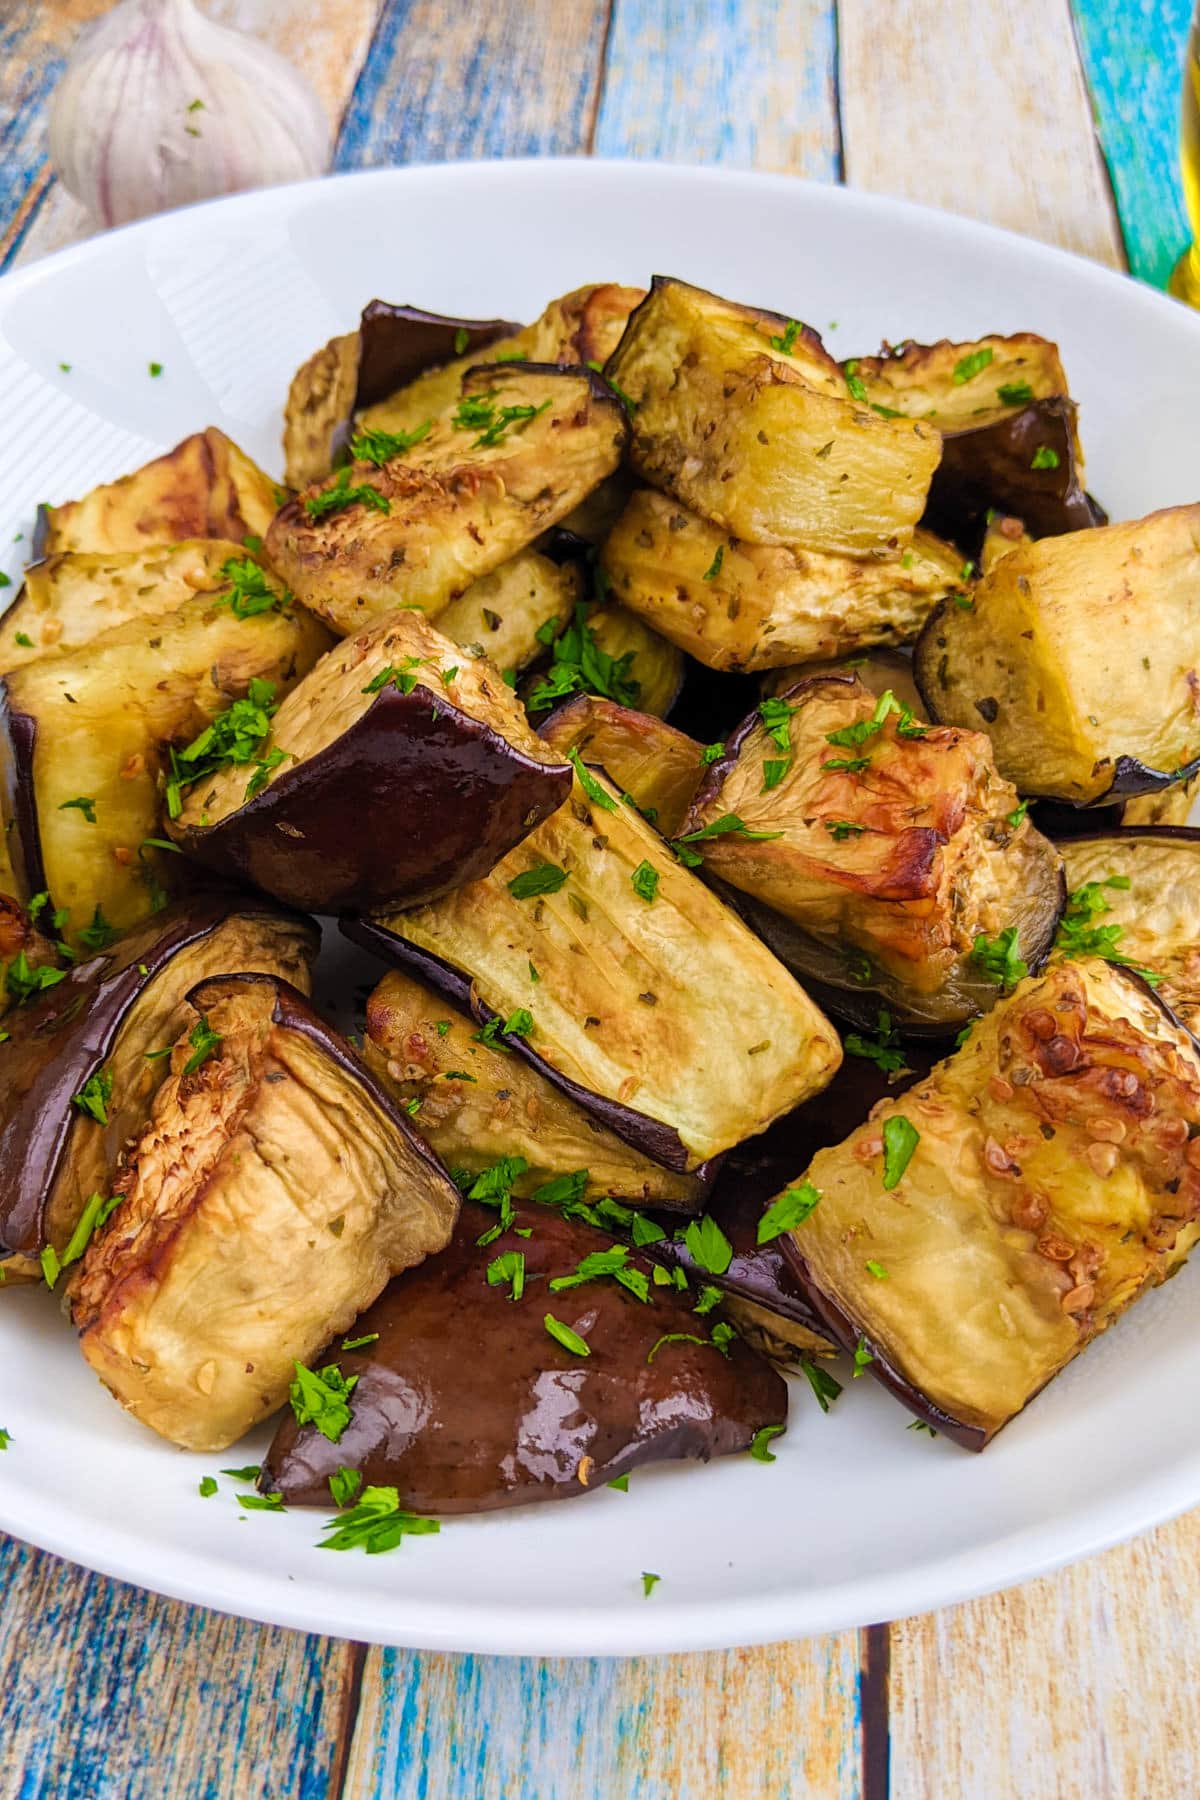 Eggplants bites with copped parsley on a white plate.